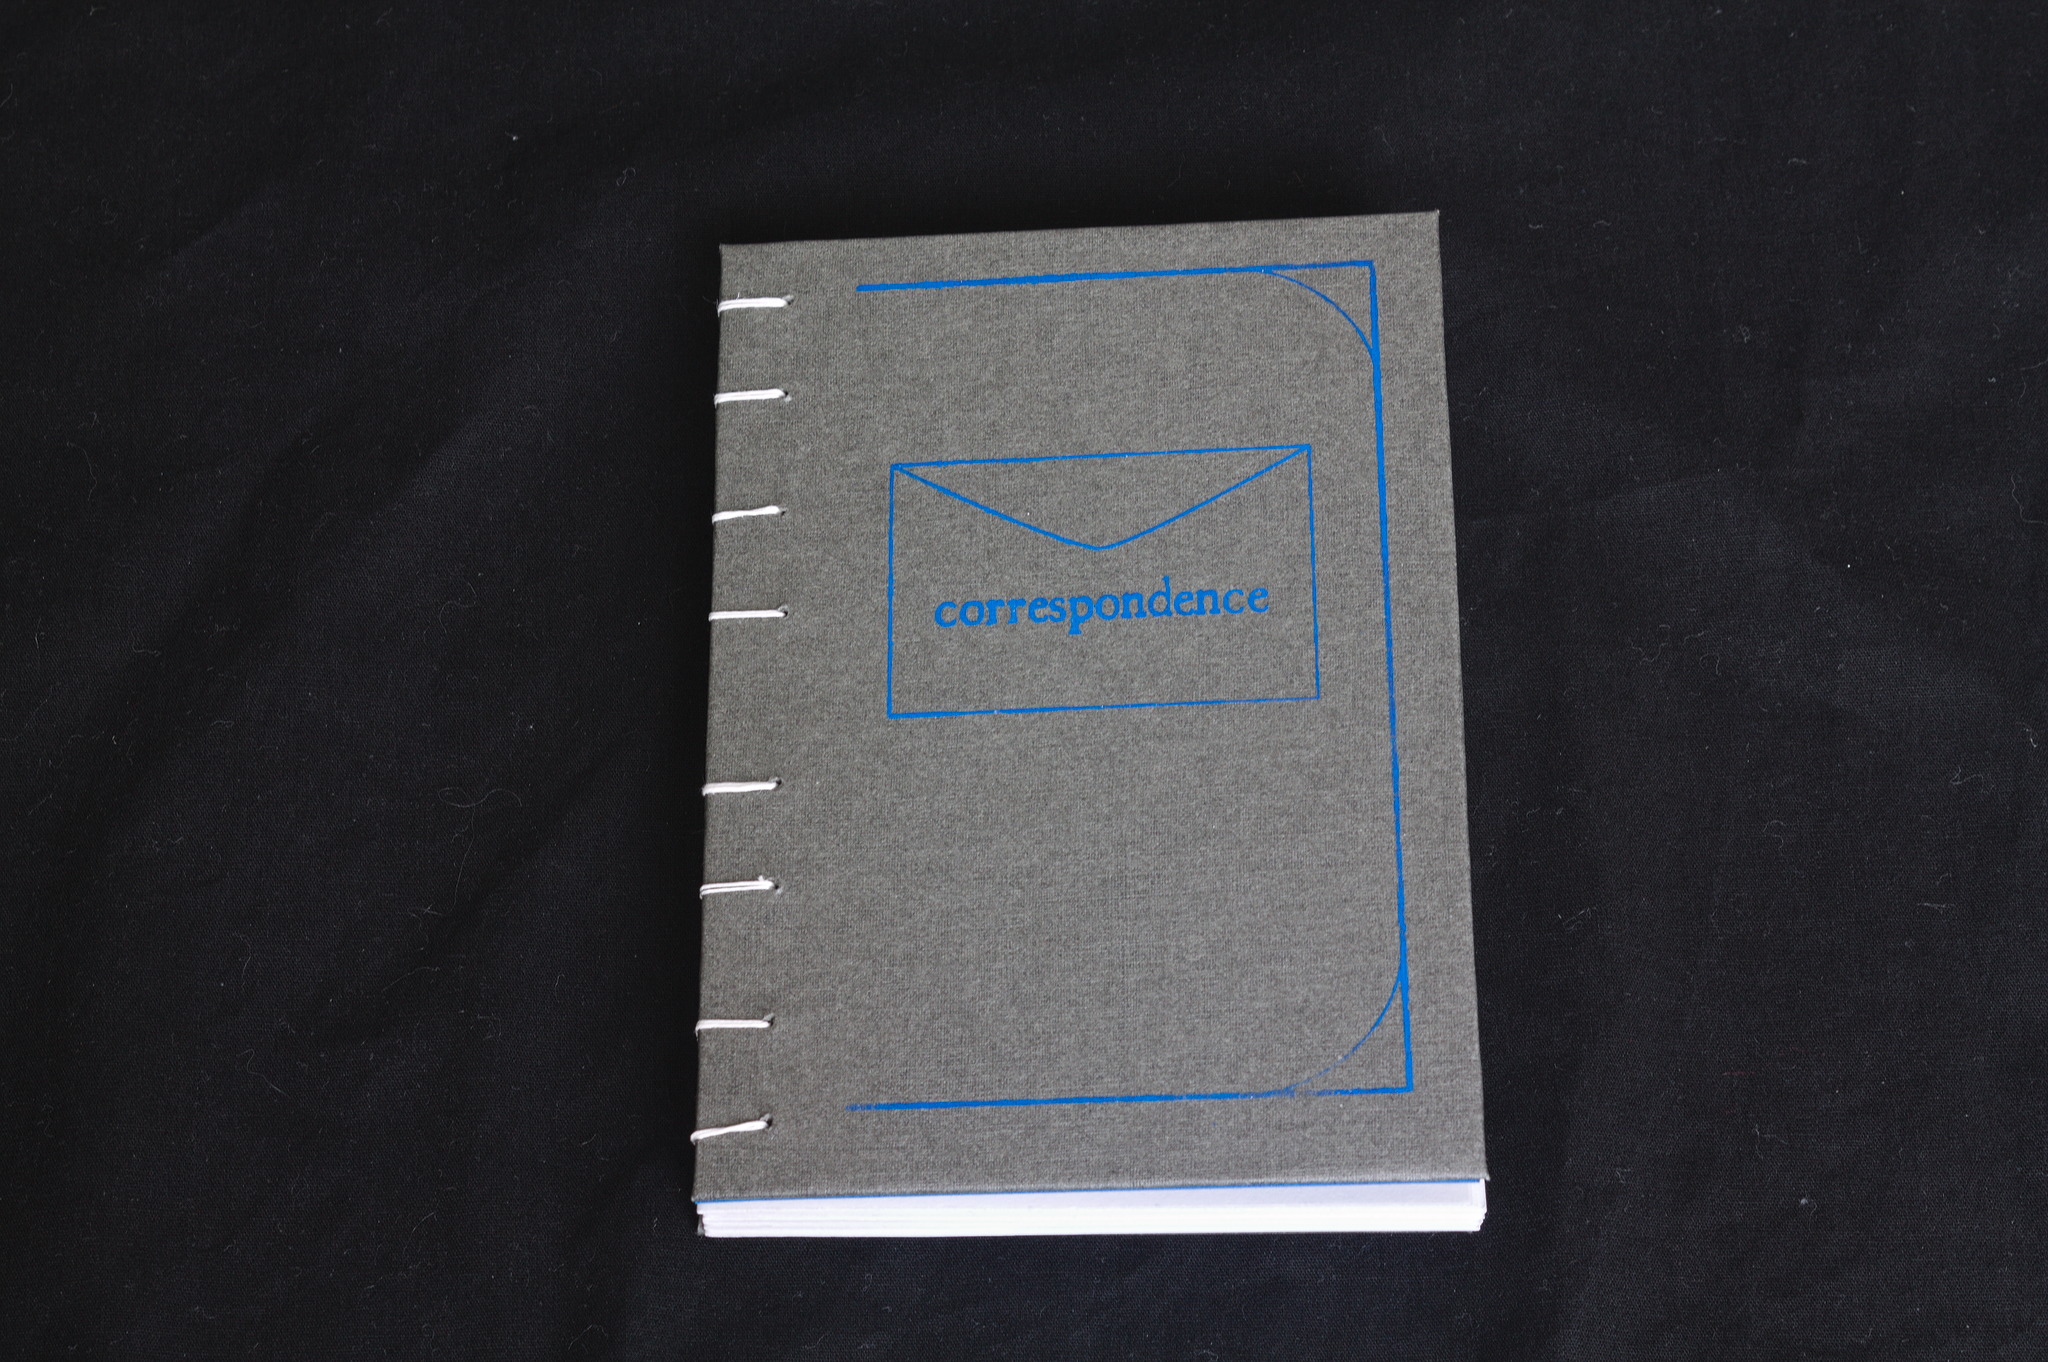 The grey cover of the book with the word correspondence, a stylised envelope and a border in blue.